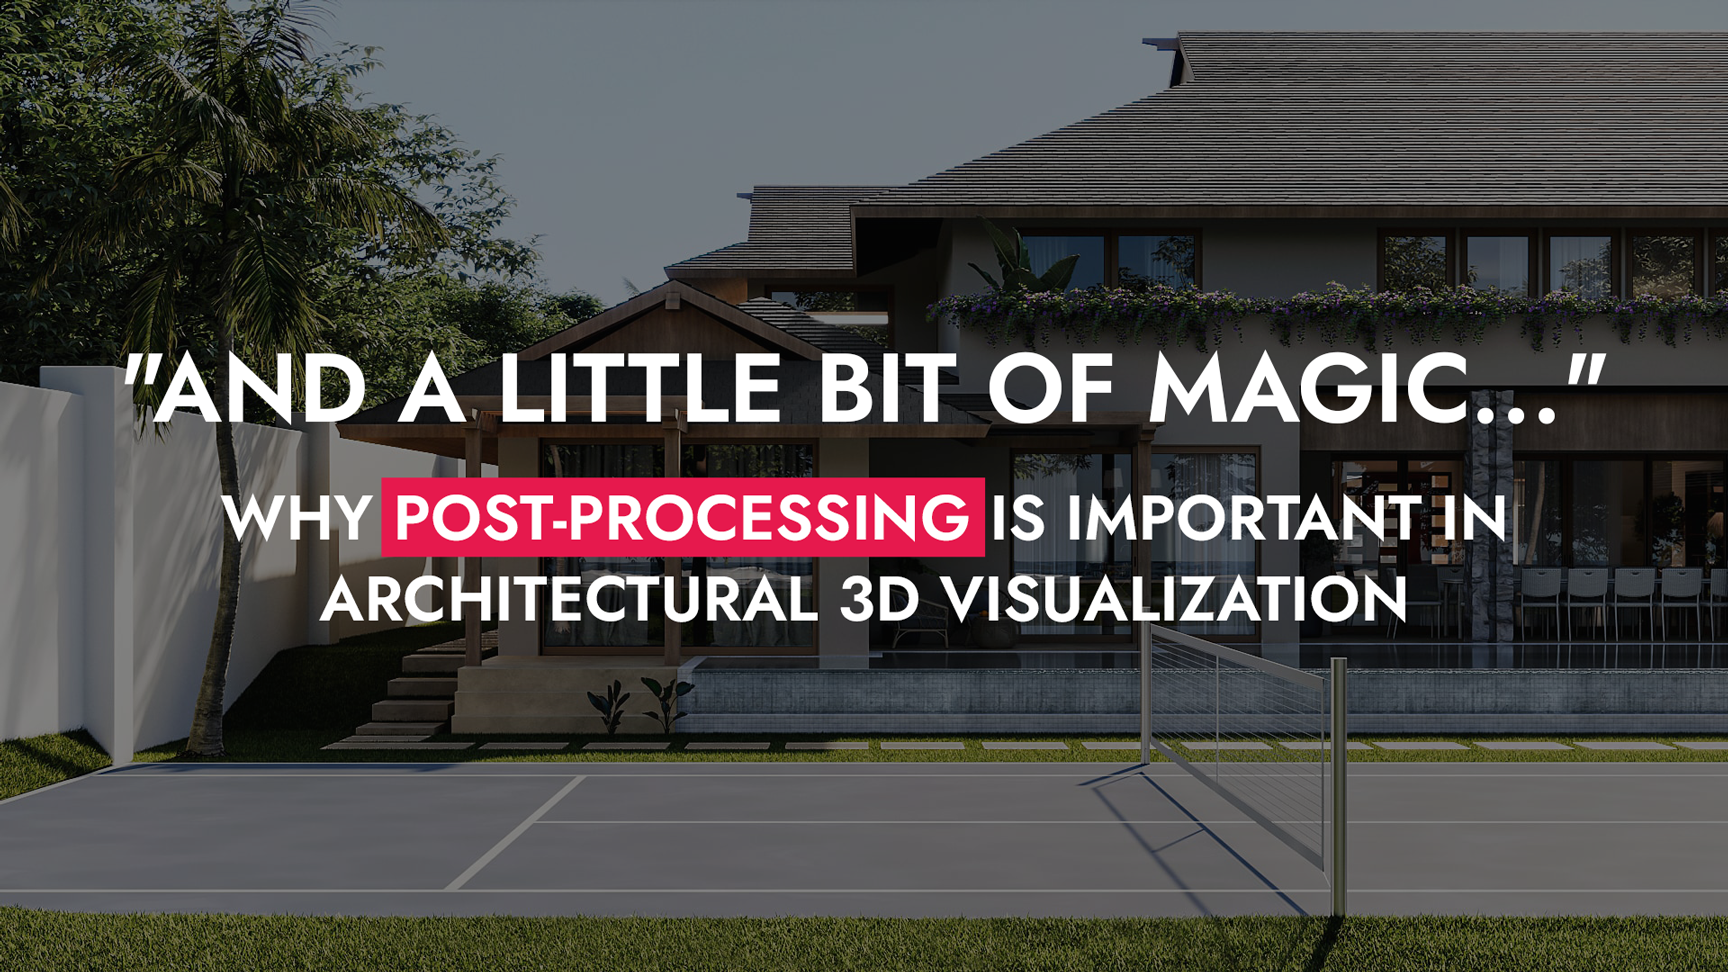 0011 15 23 And A Little Bit Of Magic Why Post Processing Is Important In Architectural 3D Visualization